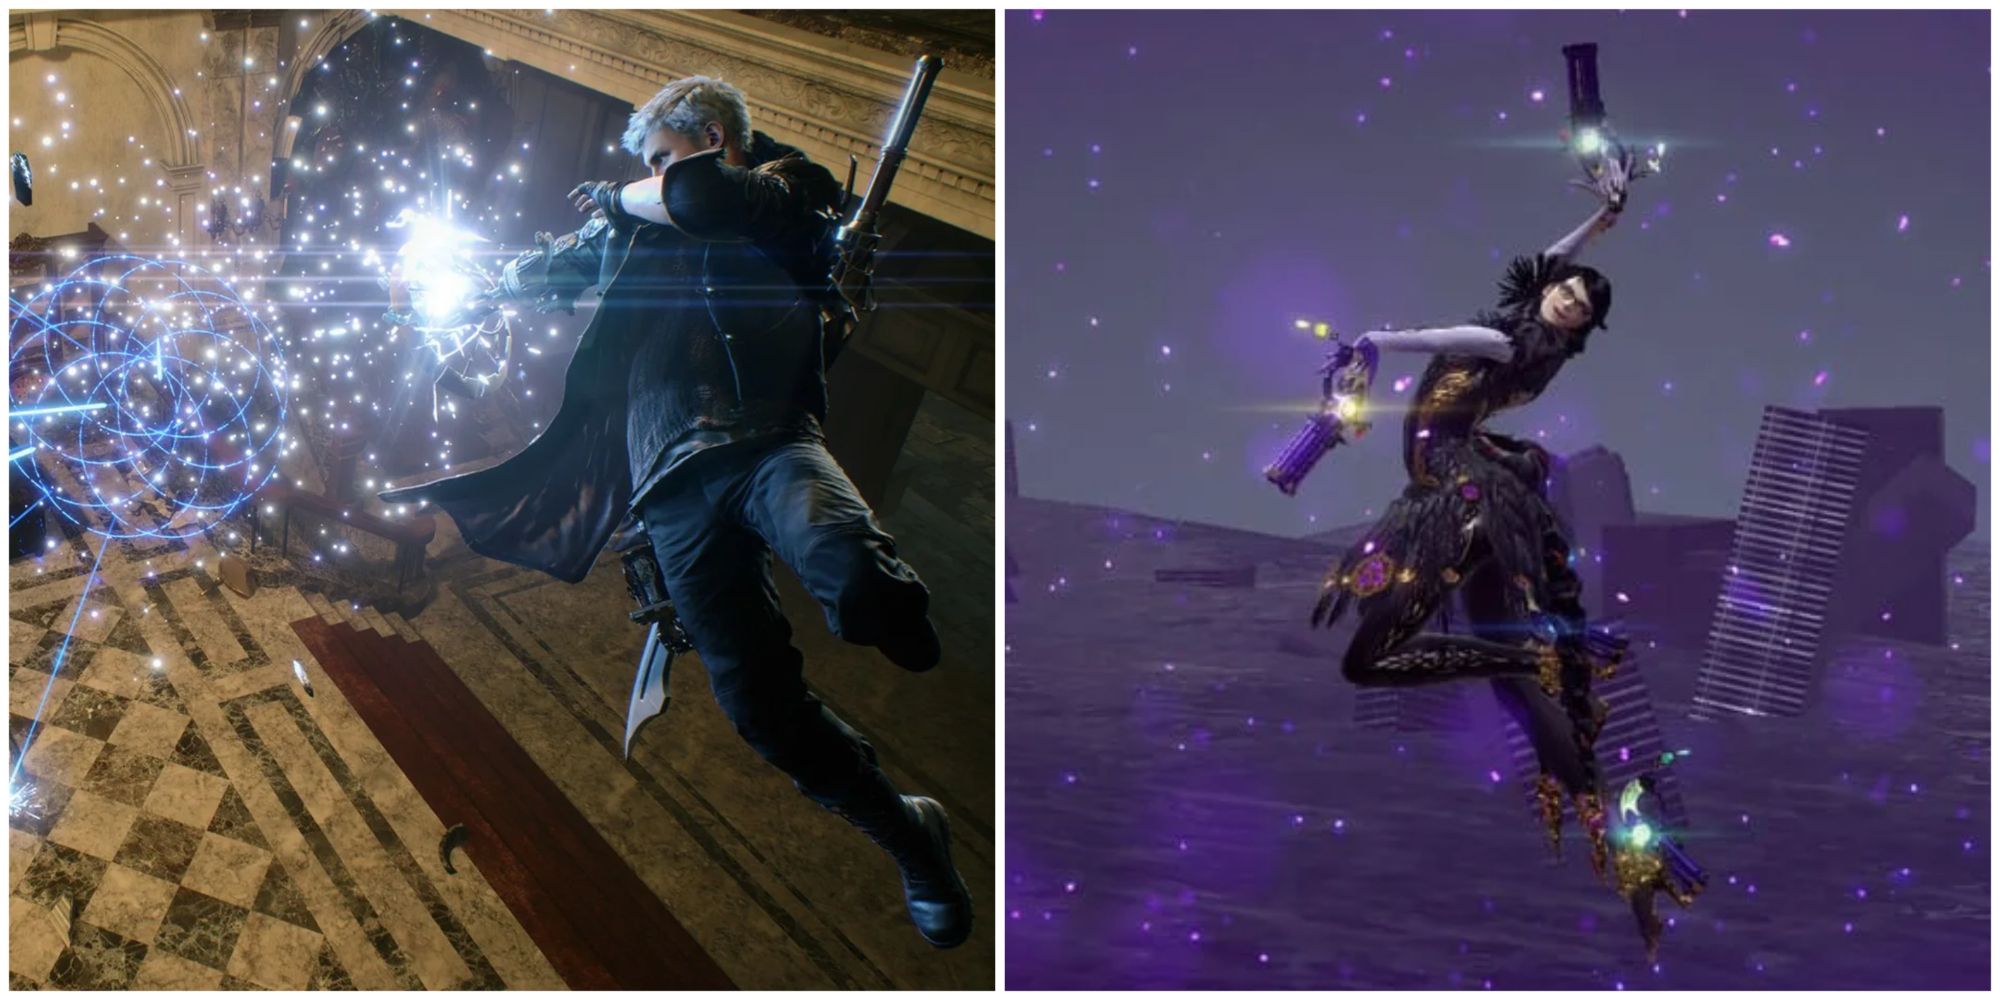 Devil May Cry 5 Nero in the air and Bayonetta in the air